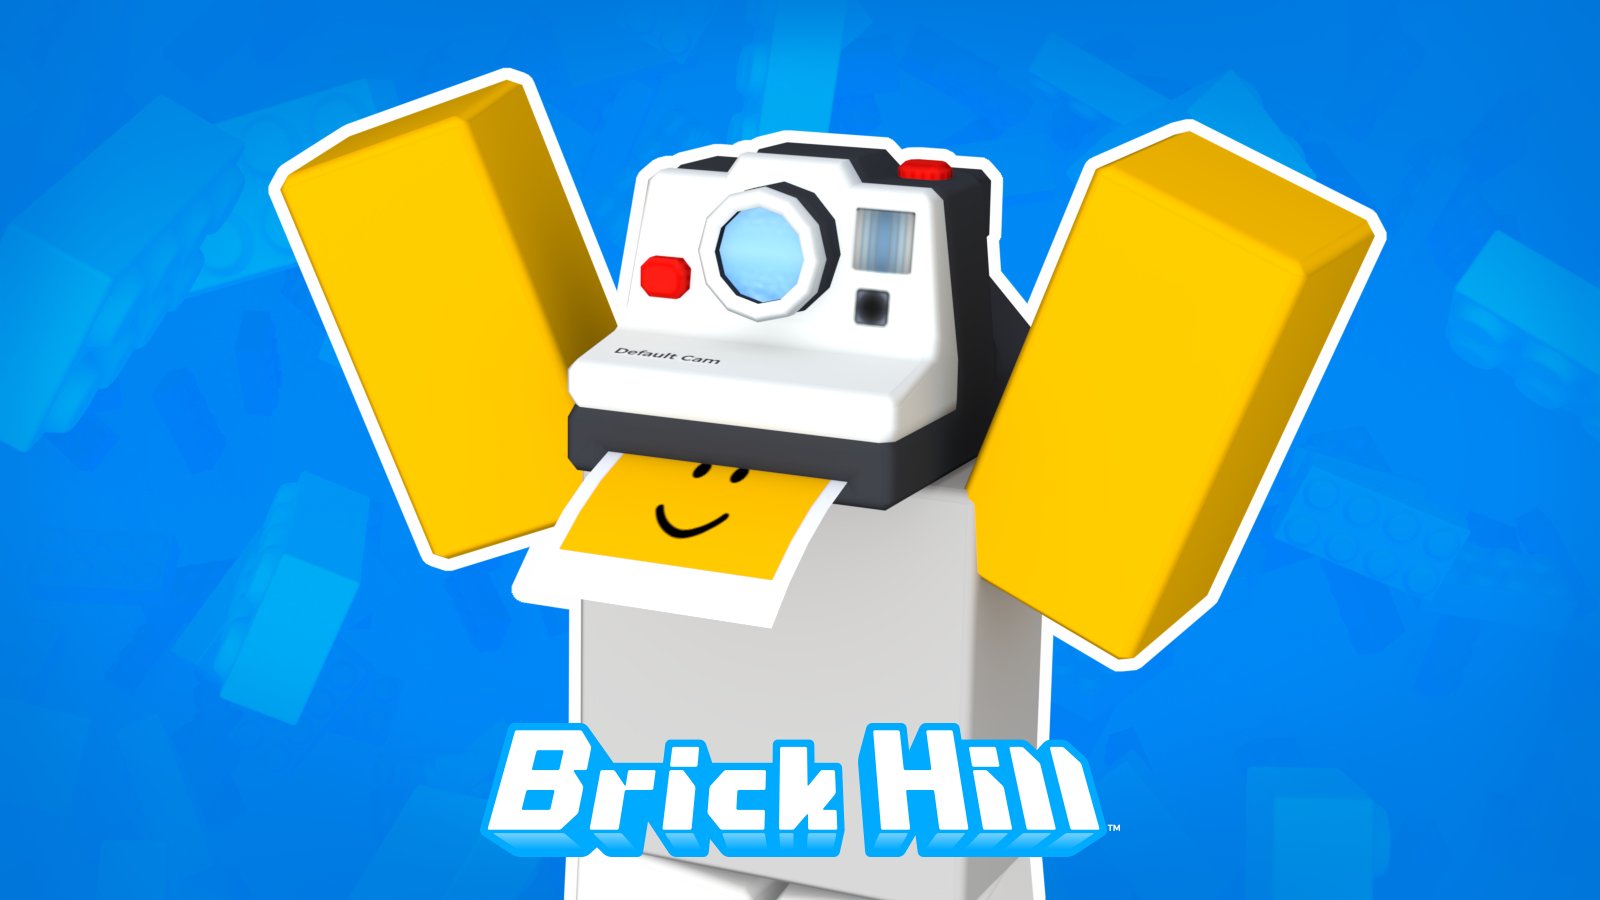 HOW DO I GET BANENED - Brick Hill